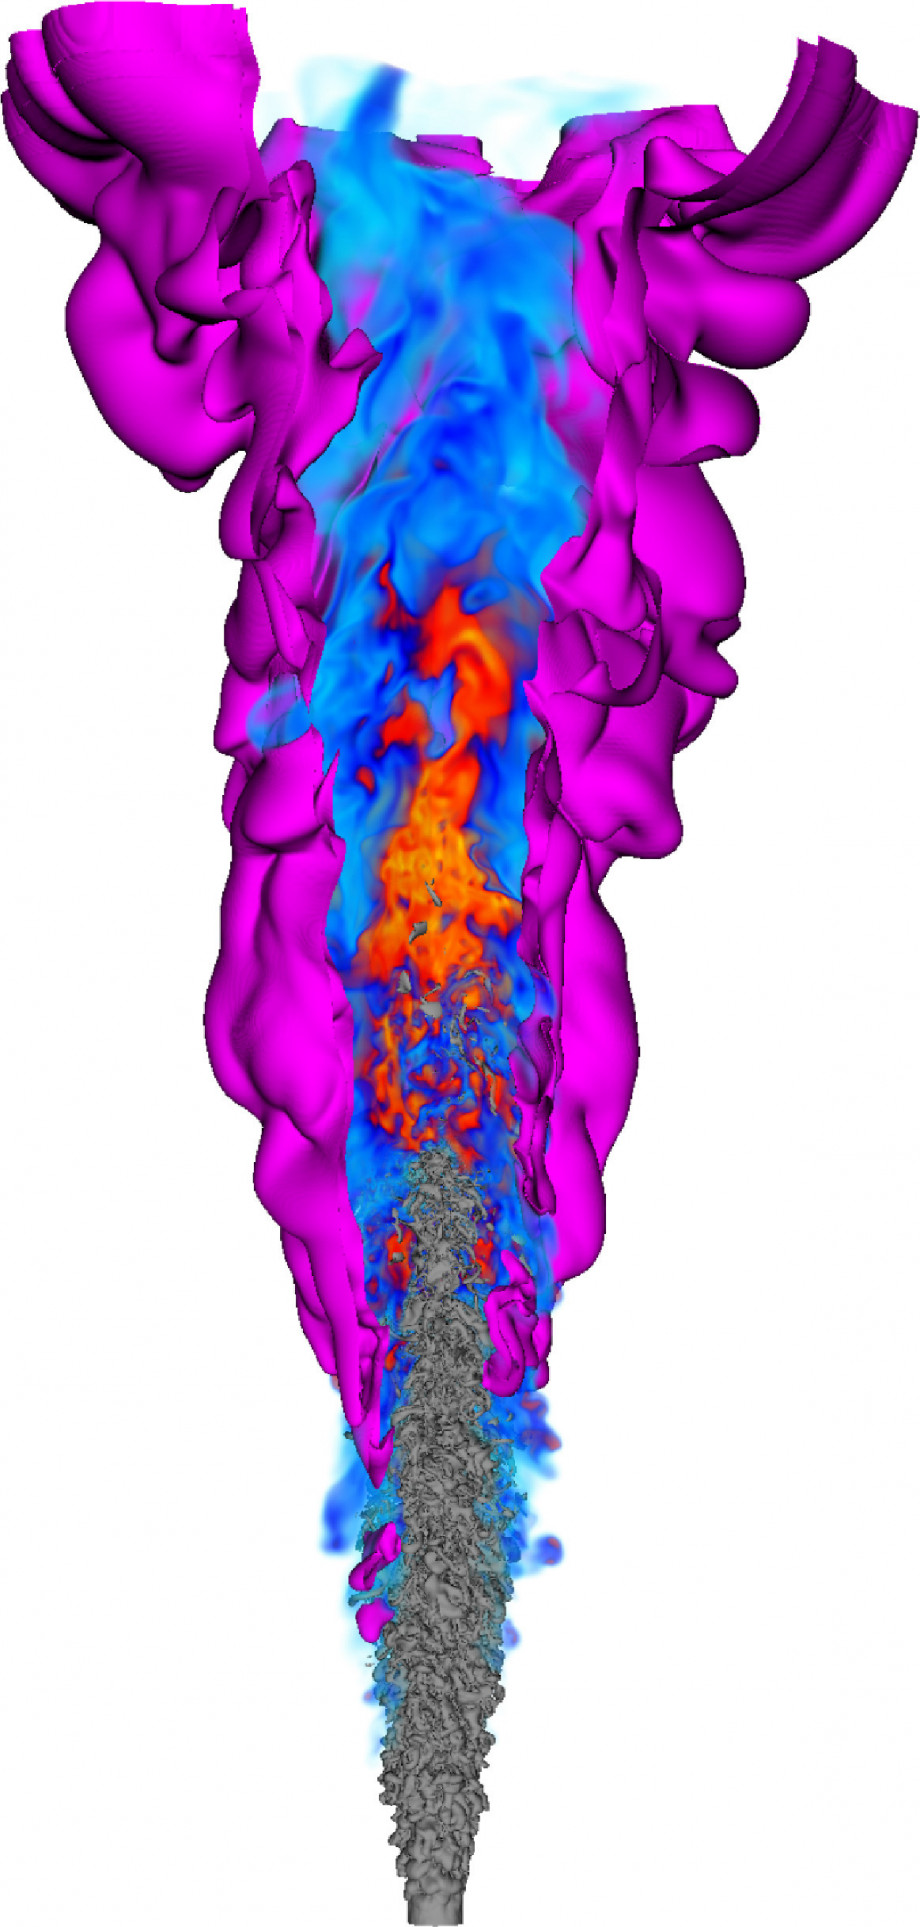 Three dimensional rendering of a flame from Direct Numerical Simulations, showing layers of heat and chemical compounds extending out from the point of ignition.